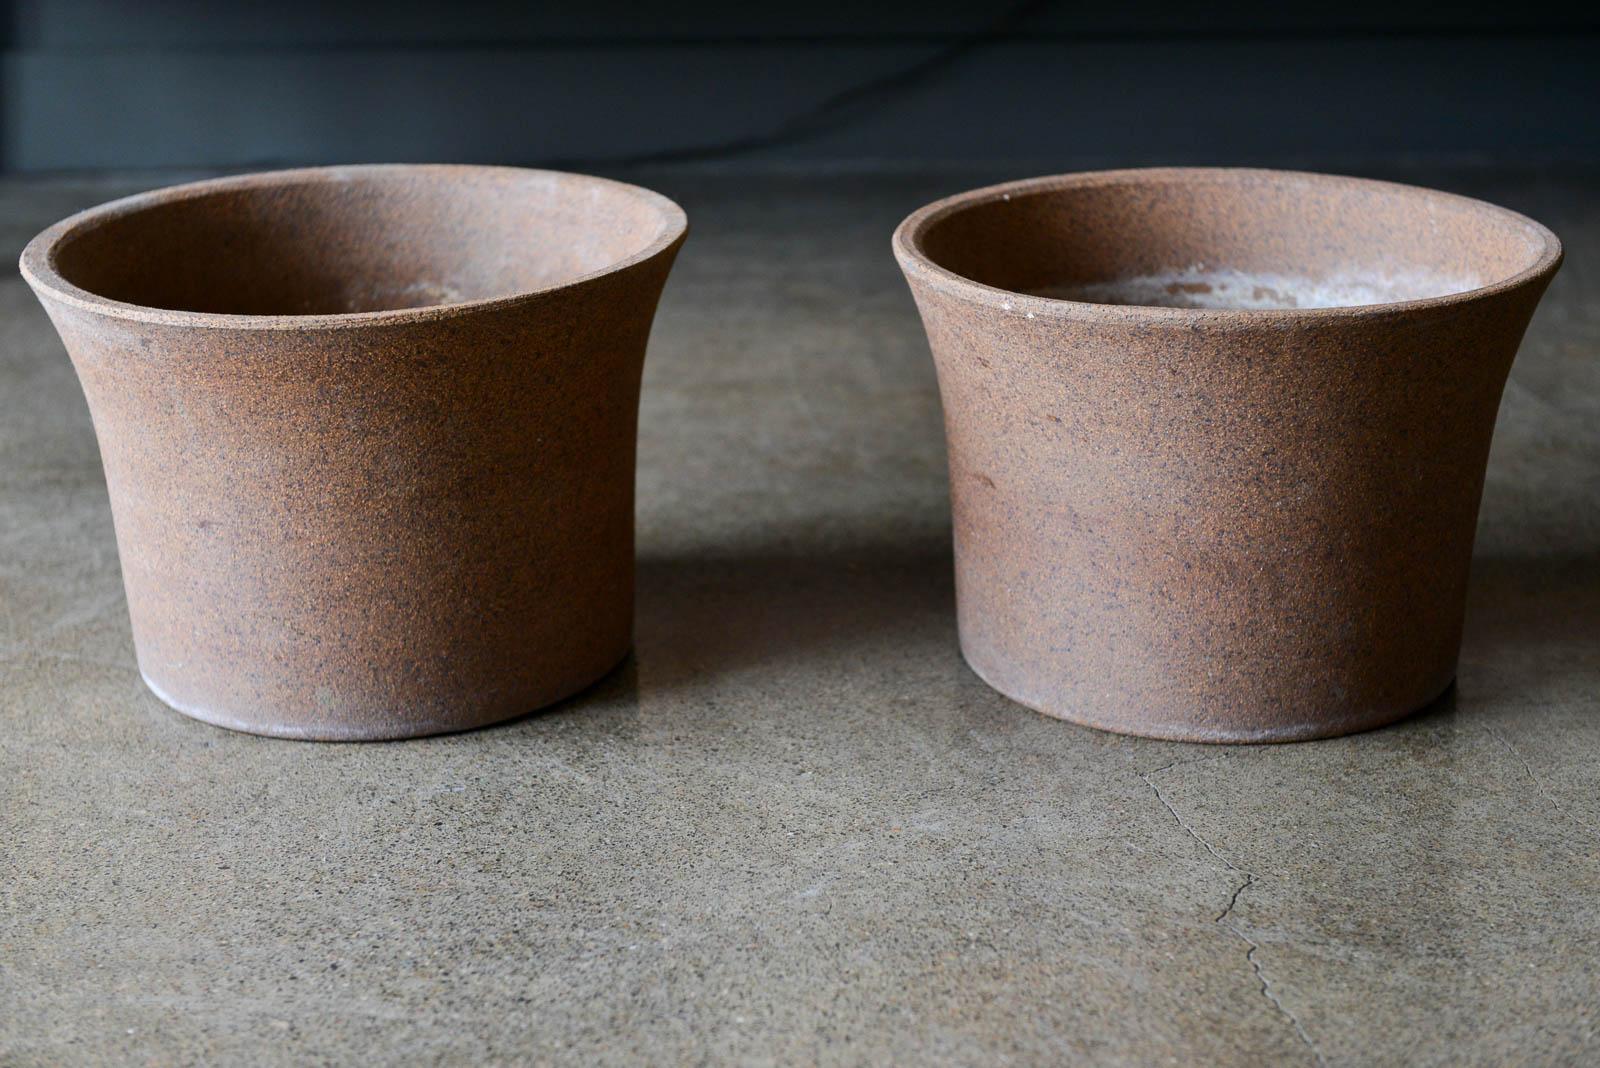 Marilyn Kay Austin for Architectural Pottery unglazed vessels, pair, circa 1970. Beautiful stoneware unglazed versions in very good original condition with matching inscribed dates on bottom of 10-20-1976. Both have some slight calcium deposits but